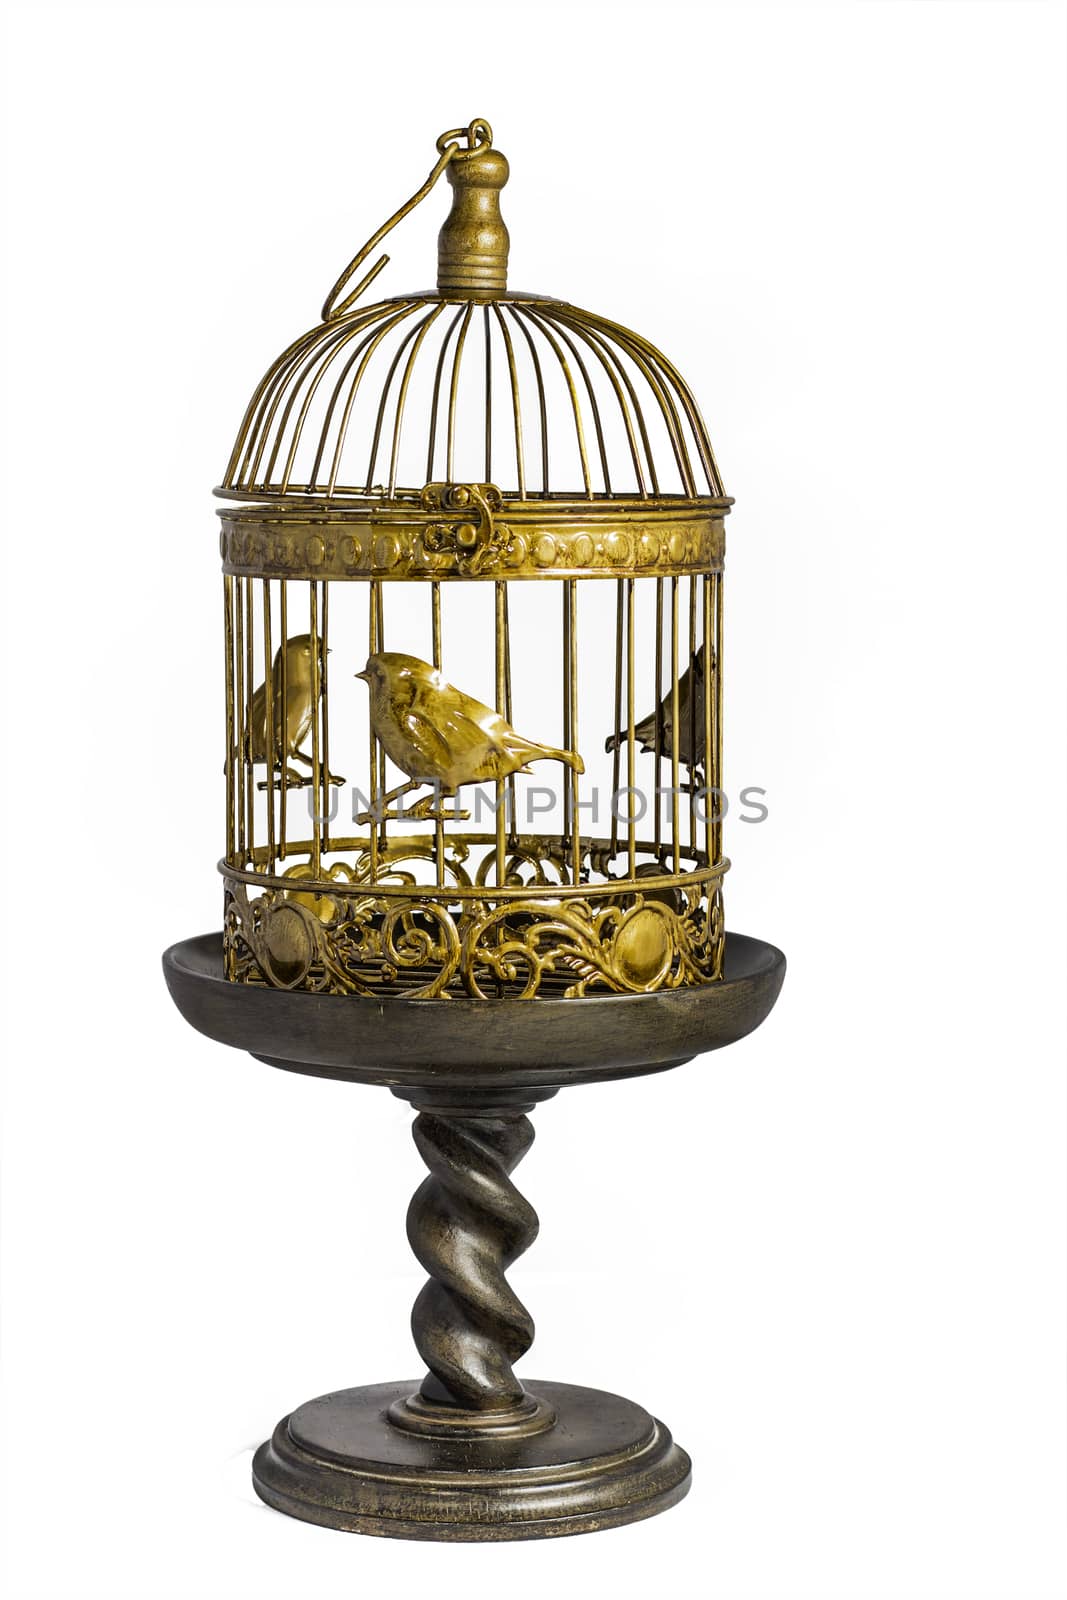 A gold and brown birdcage sitting on top of a decorative pedestal stand.